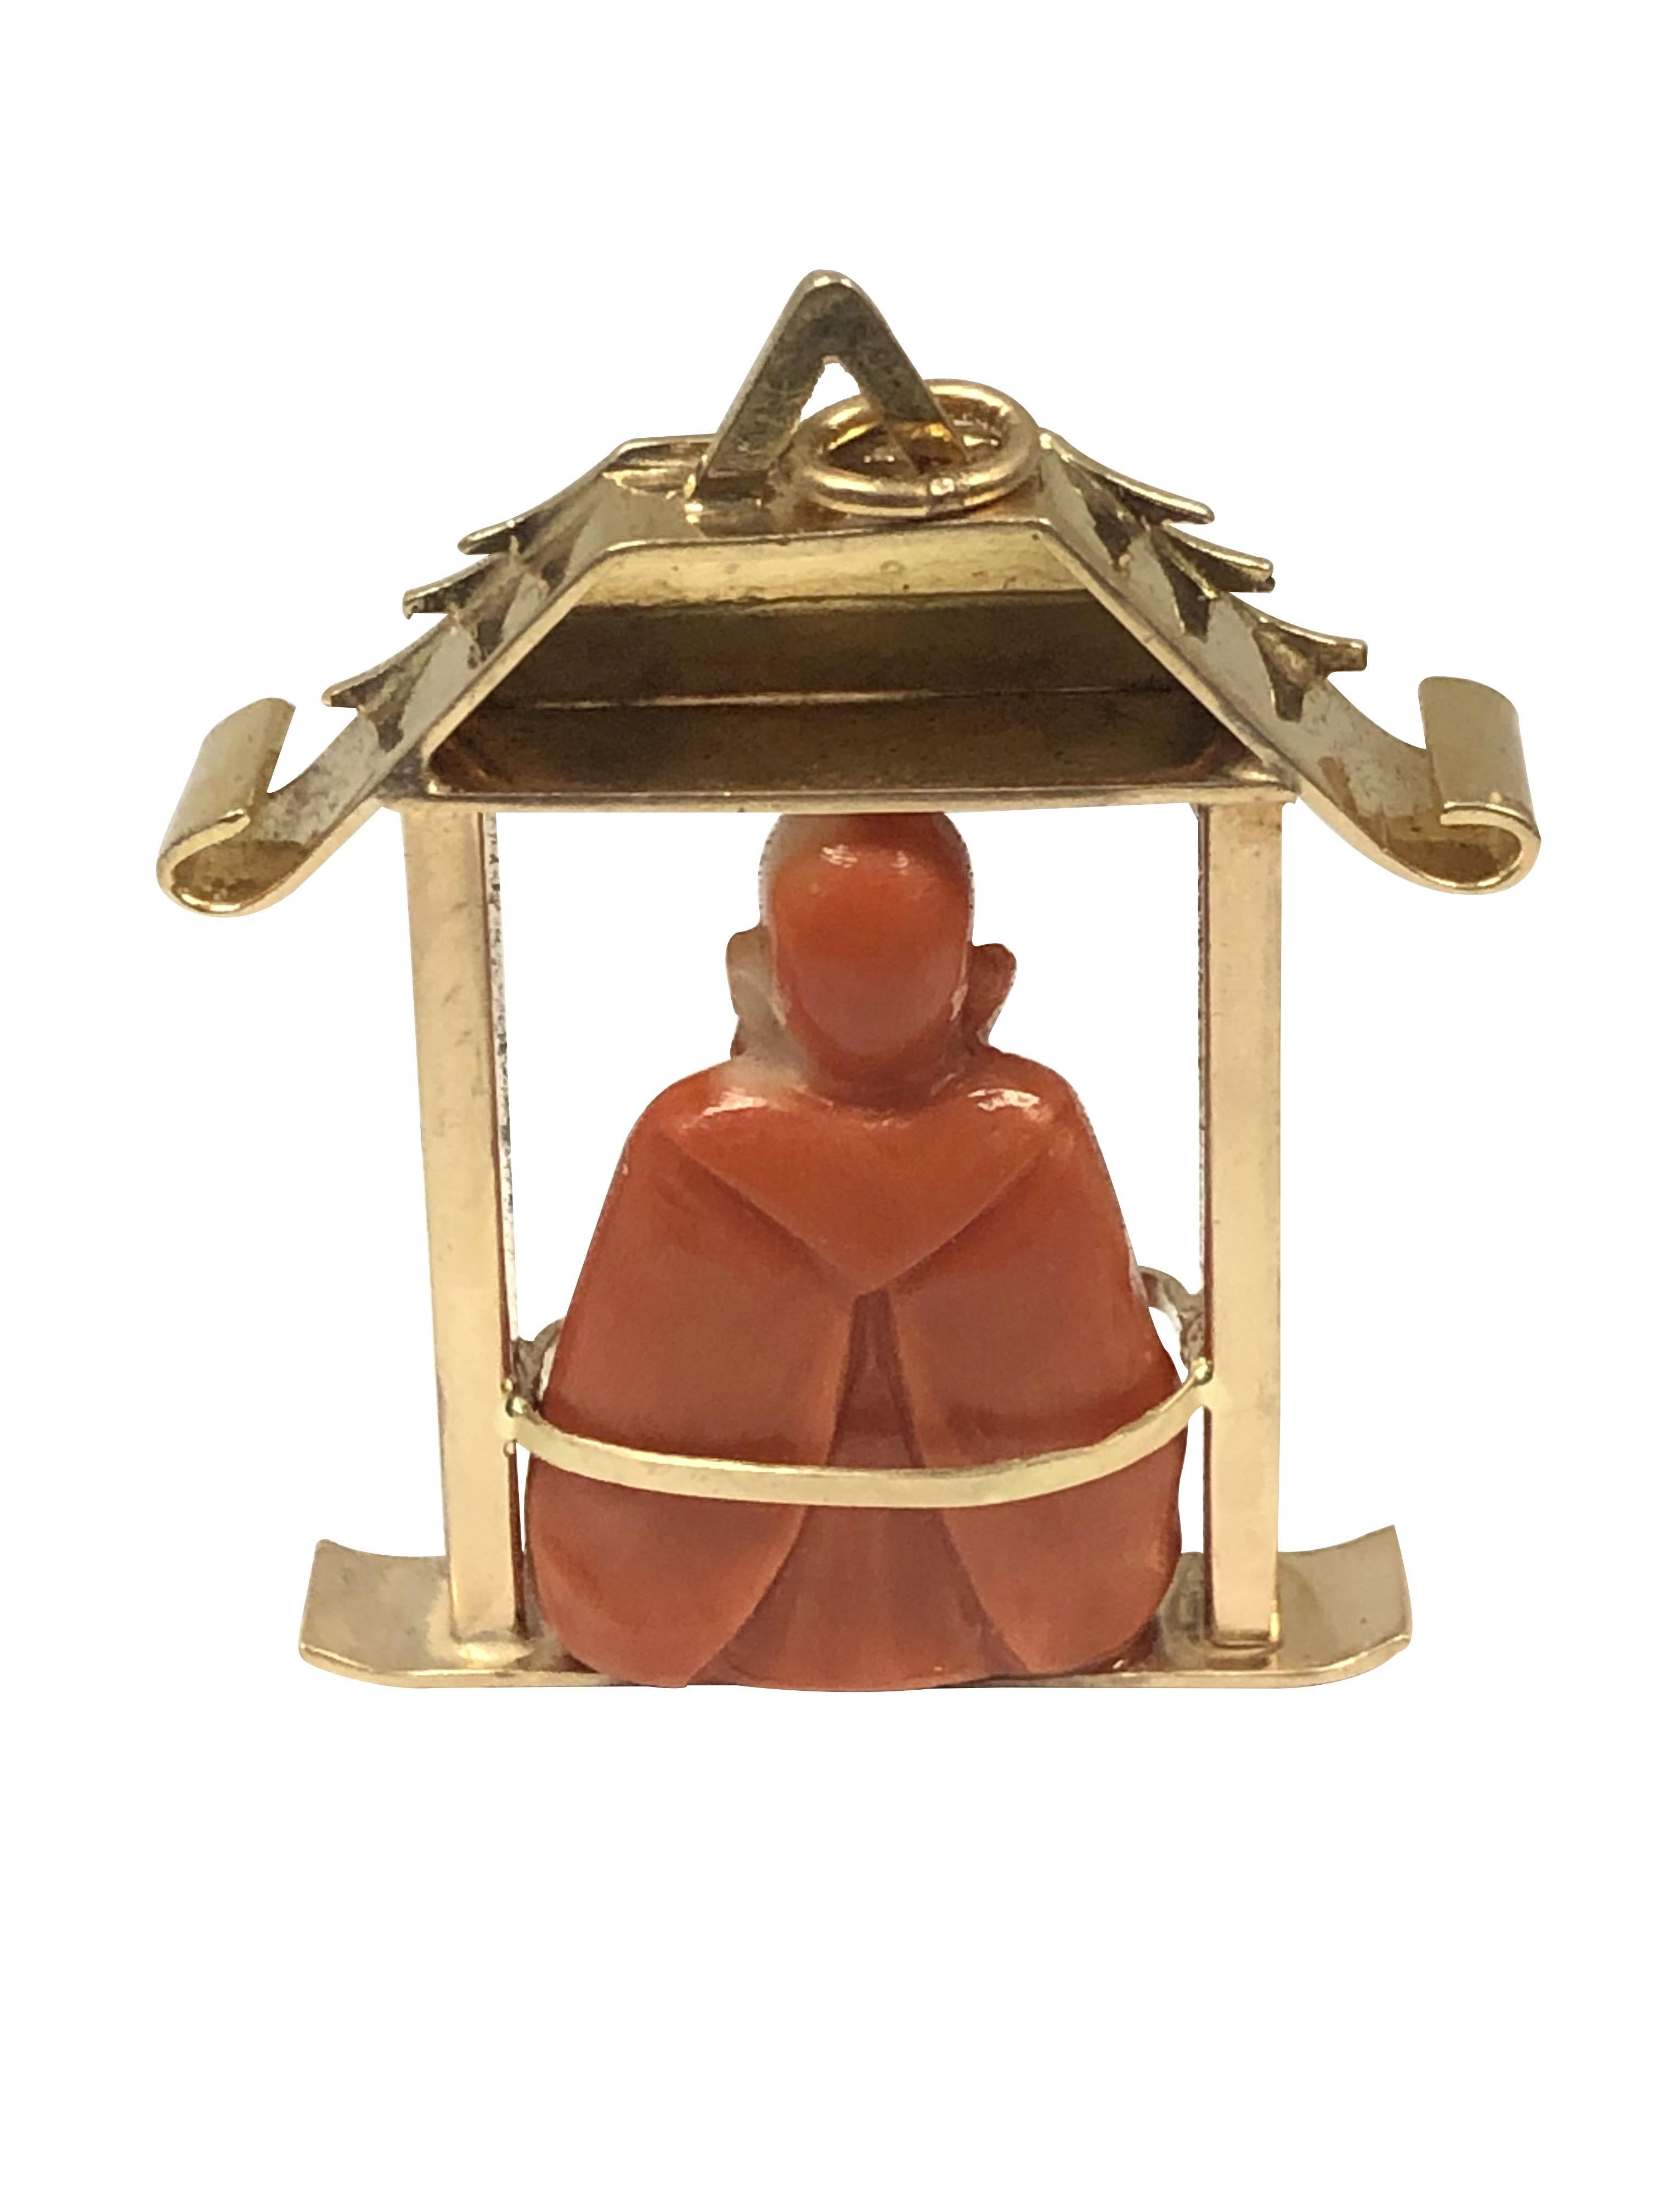 Circa 1940s 14k Yellow Gold Pagoda form Charm Pendant, measuring 1 3/4 inches in length X 1 1/2 inches and weighing 22.7 grams. The center featuring a finely detailed carved Coral Confucius figure. 